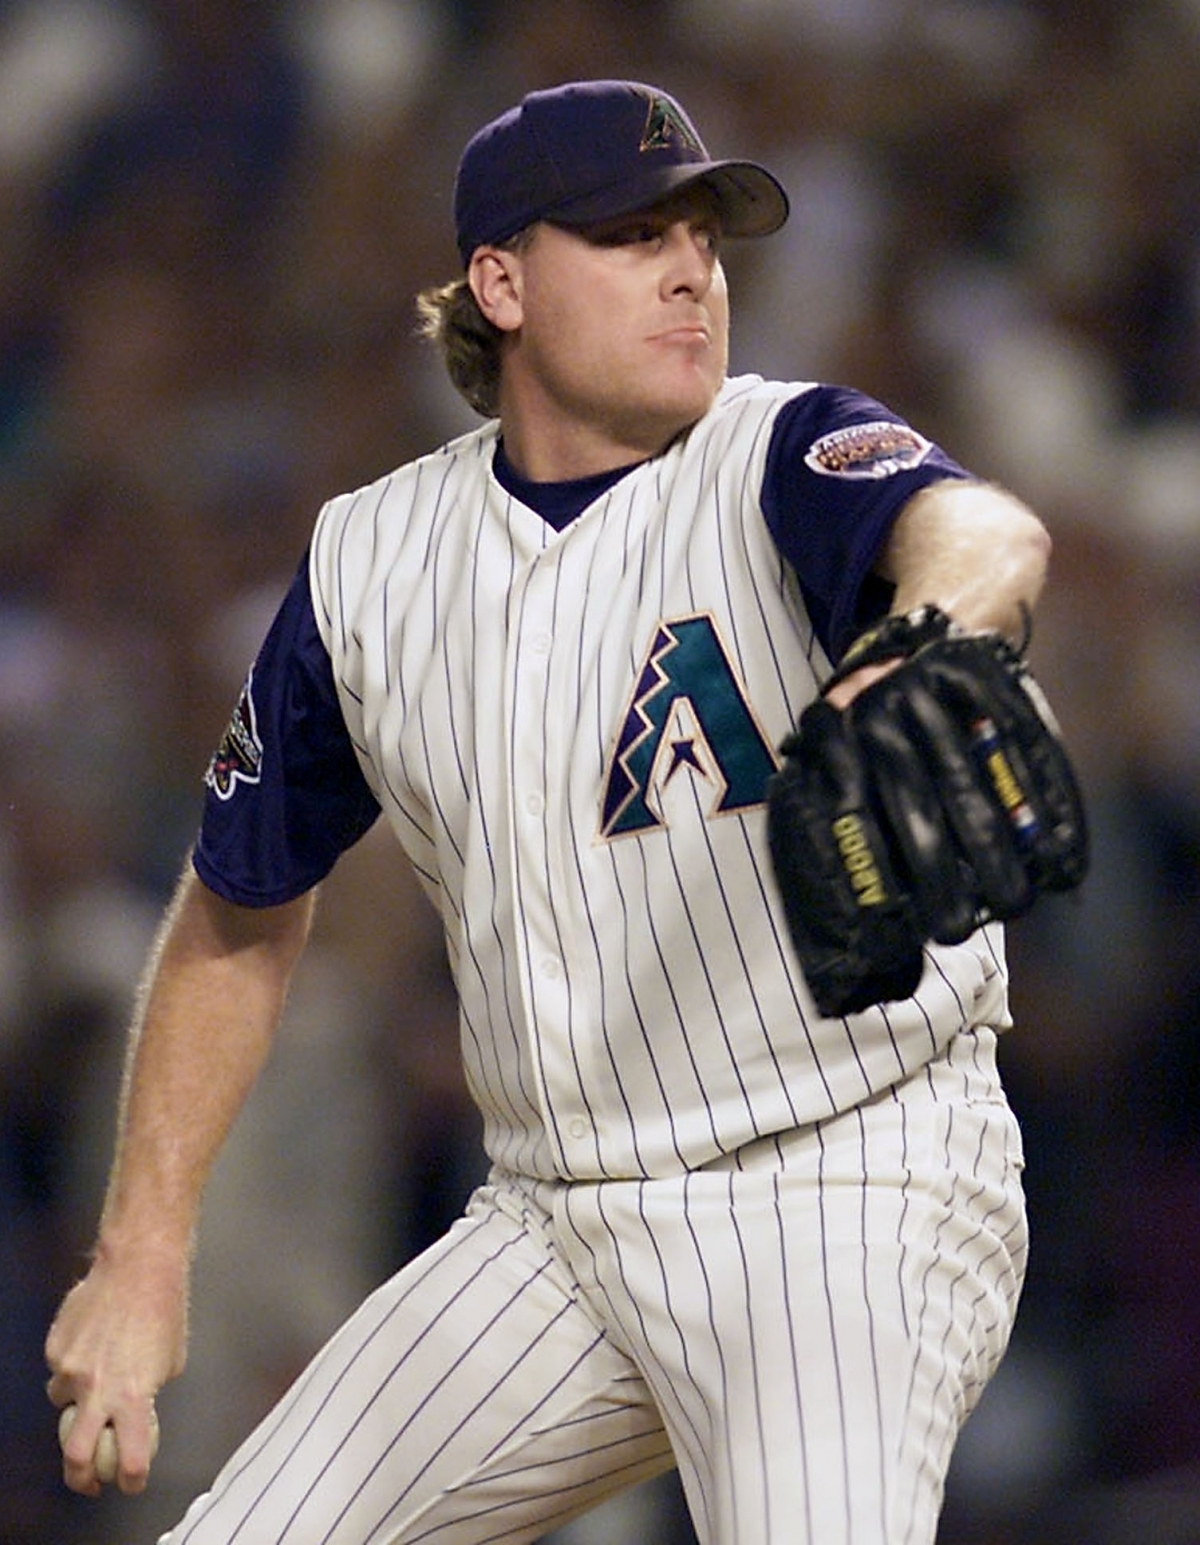 Not in Hall of Fame - 4. Curt Schilling